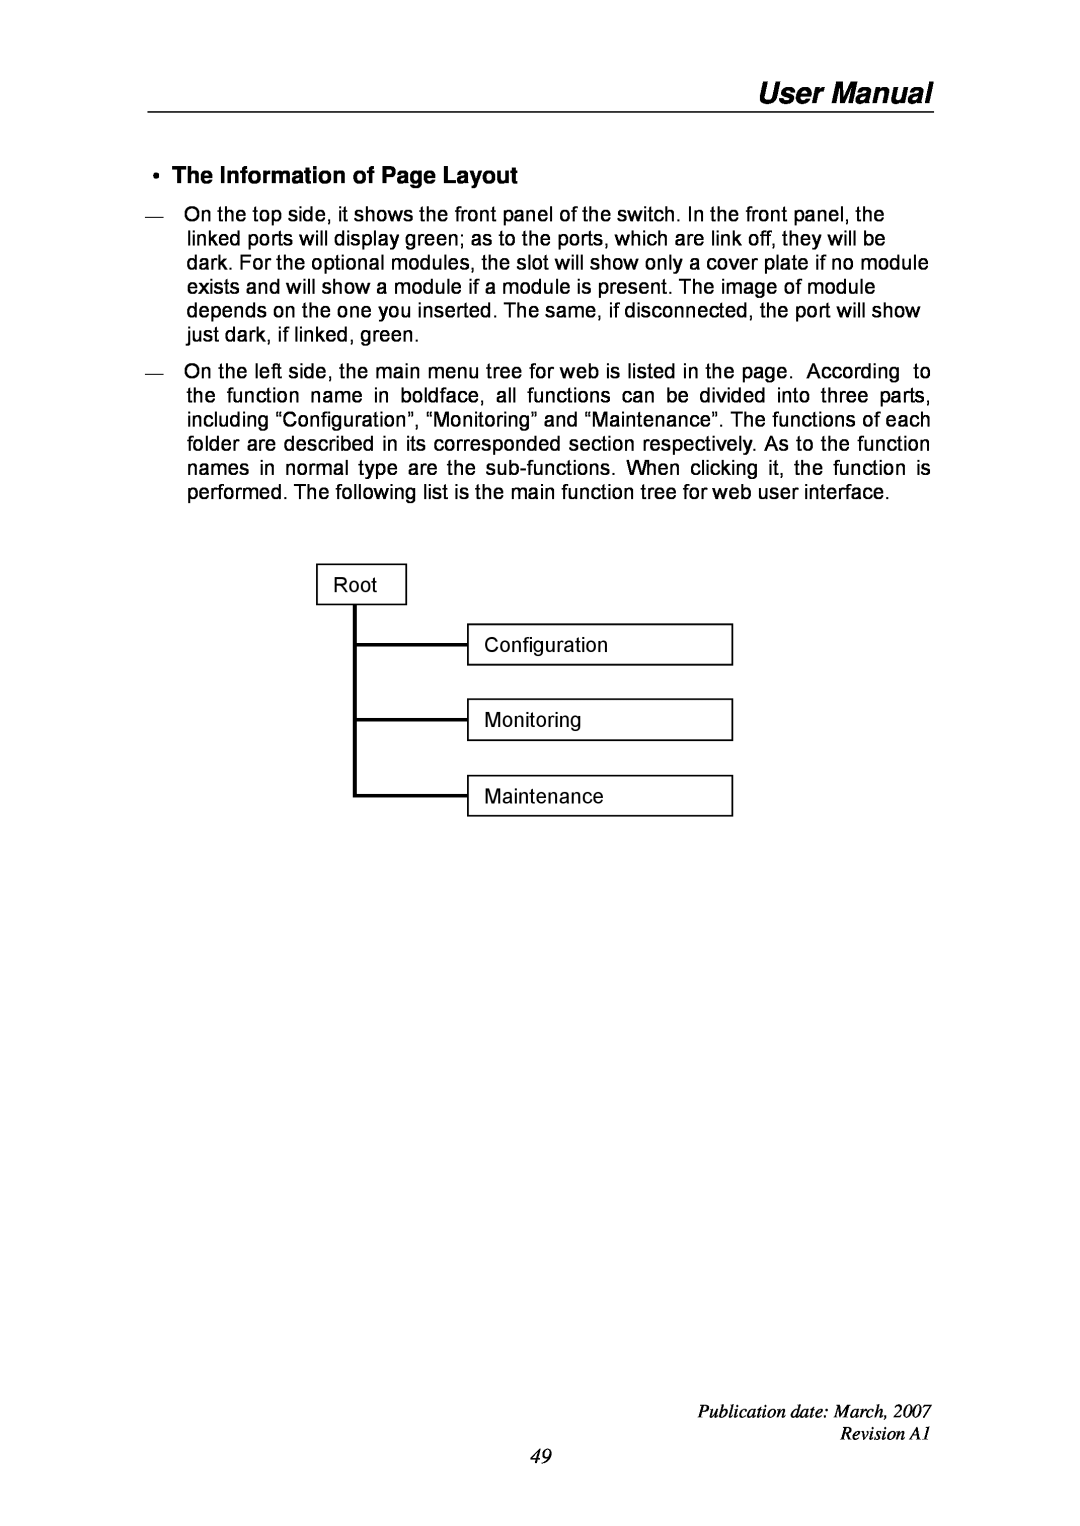 Ruby Tech GS-1224L manual The Information of Page Layout, User Manual 